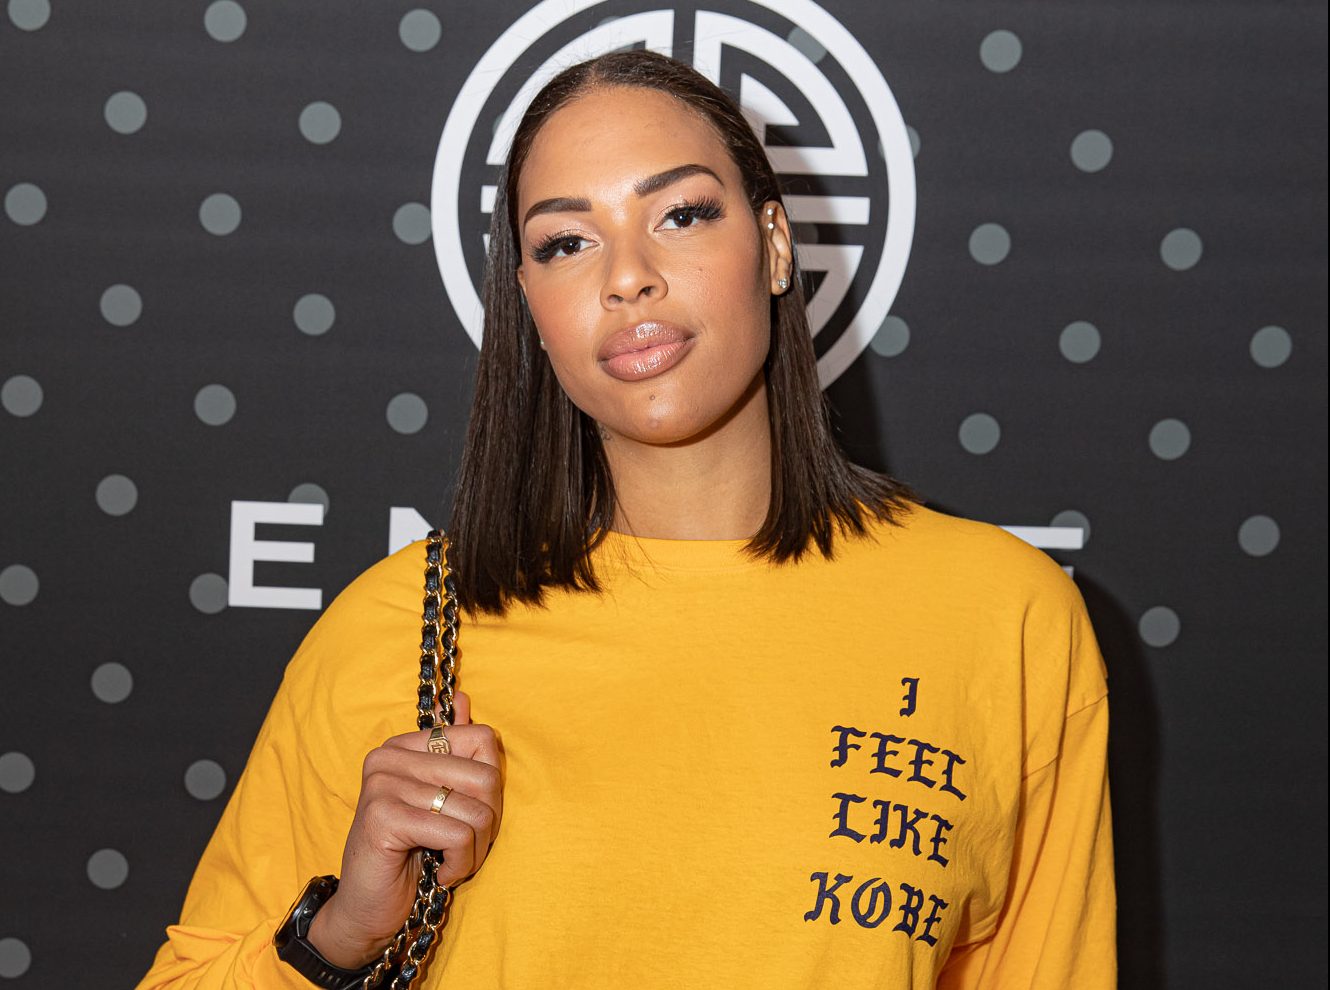 Sun's Head Coach Suspended & Fined For Comments About Liz Cambage's Weight